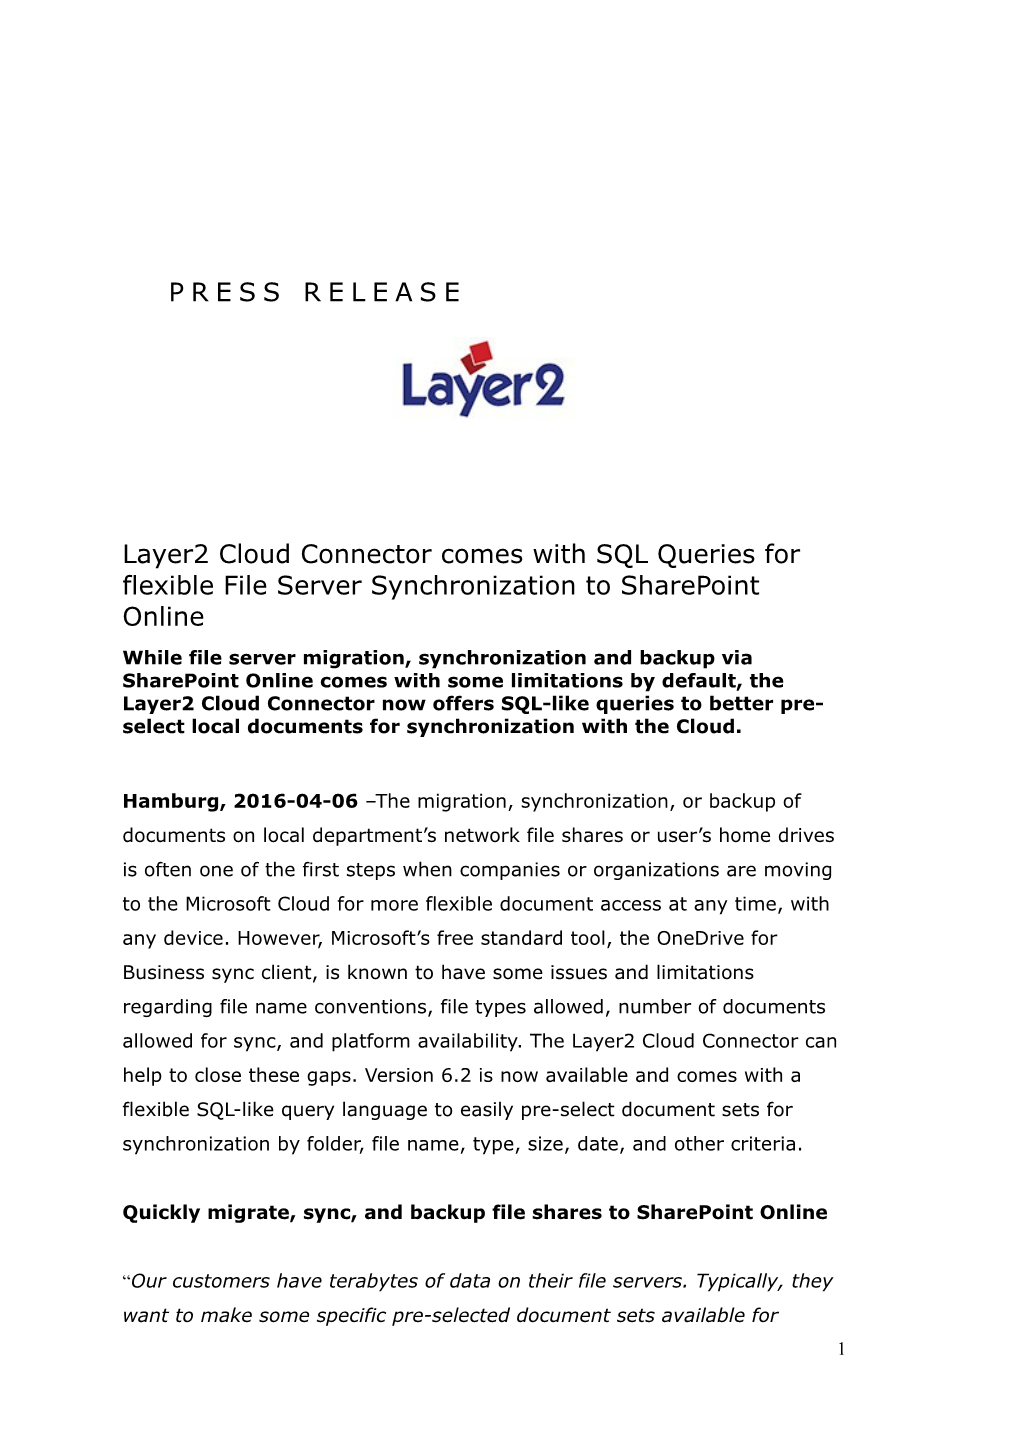 Layer2 Cloud Connector Comes with SQL Queries for Flexible File Server Synchronization